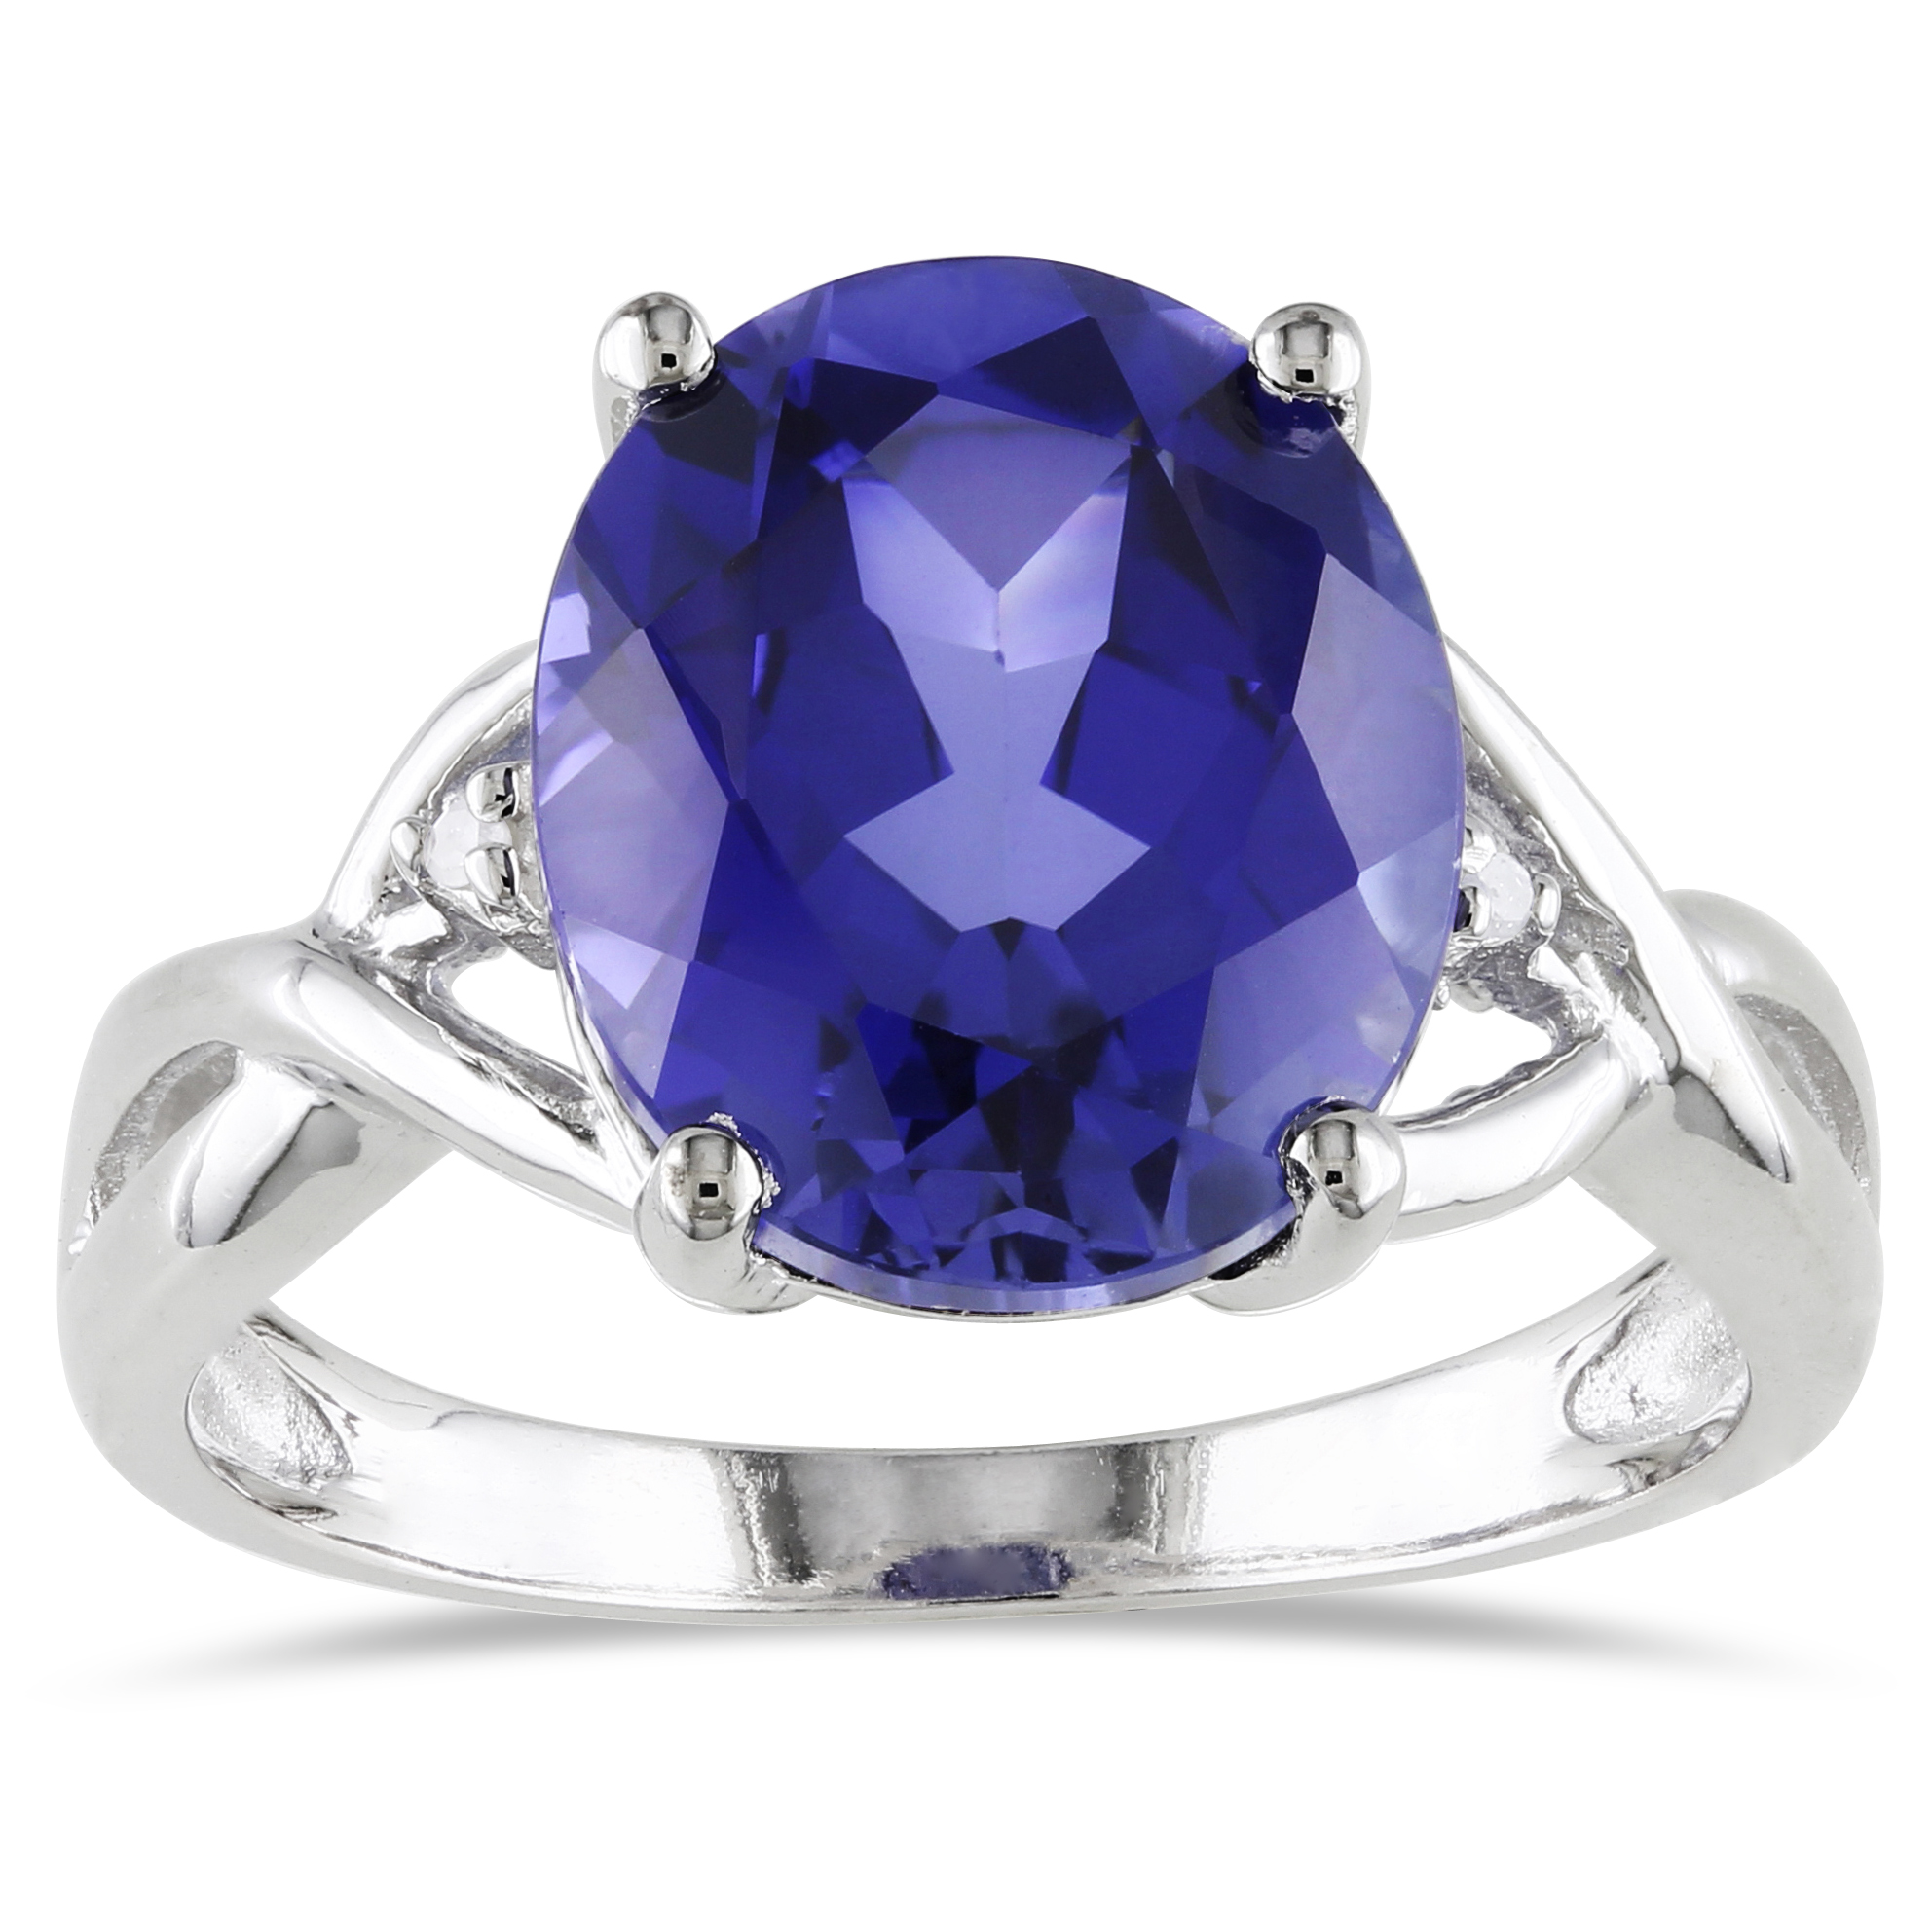 Amour 0.01 Carat T.W. Diamond and 7 1/2 Carat T.G.W. Created Blue Sapphire Fashion Ring in Sterling Silver I3